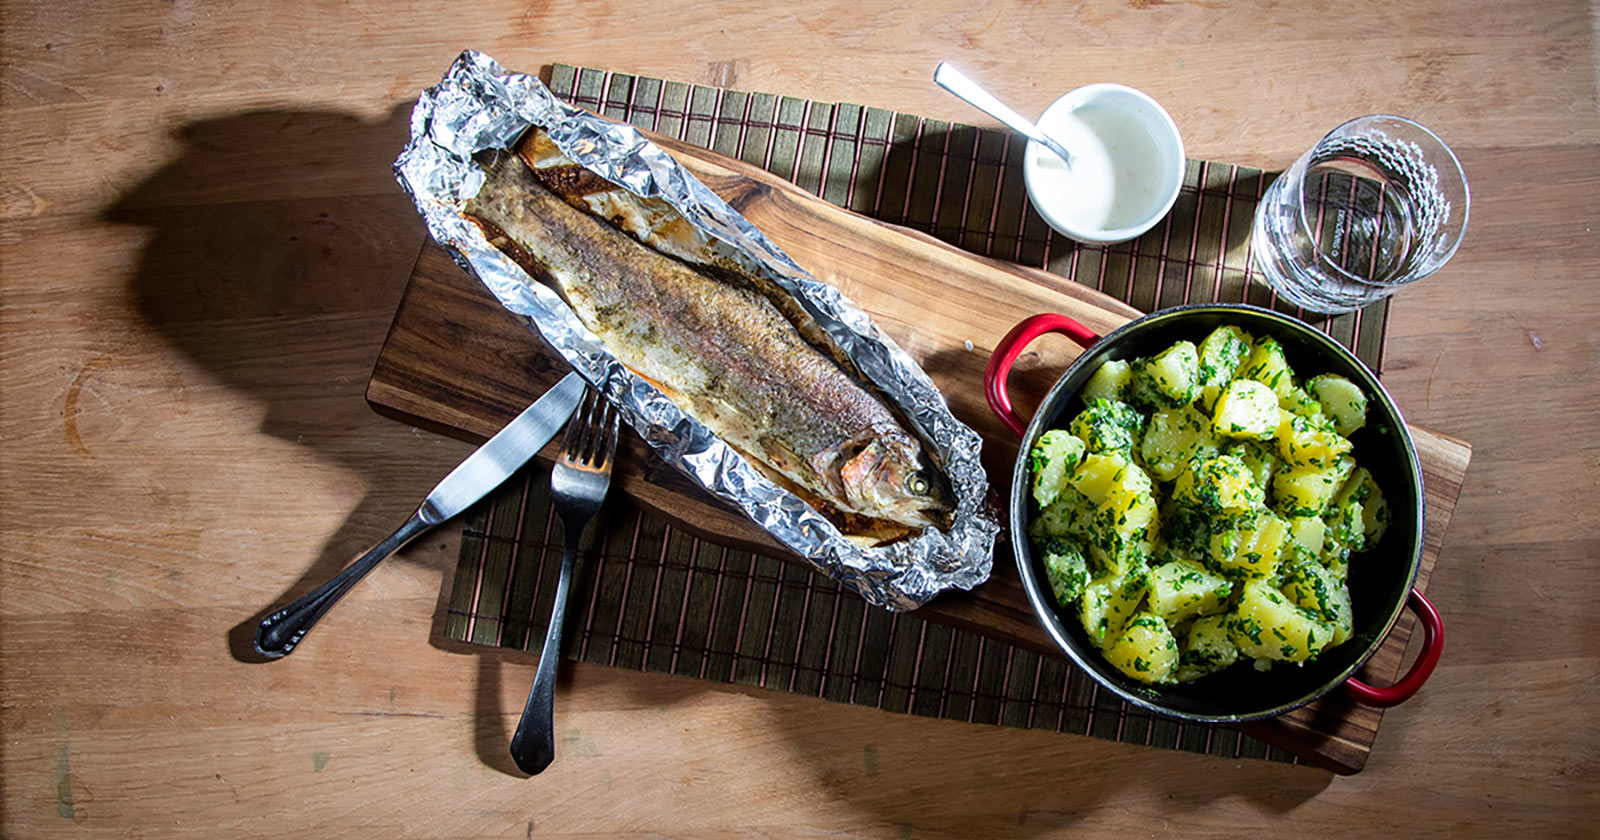 TROUT BECOMES PARTICULARLY TENDER IN THE OVEN